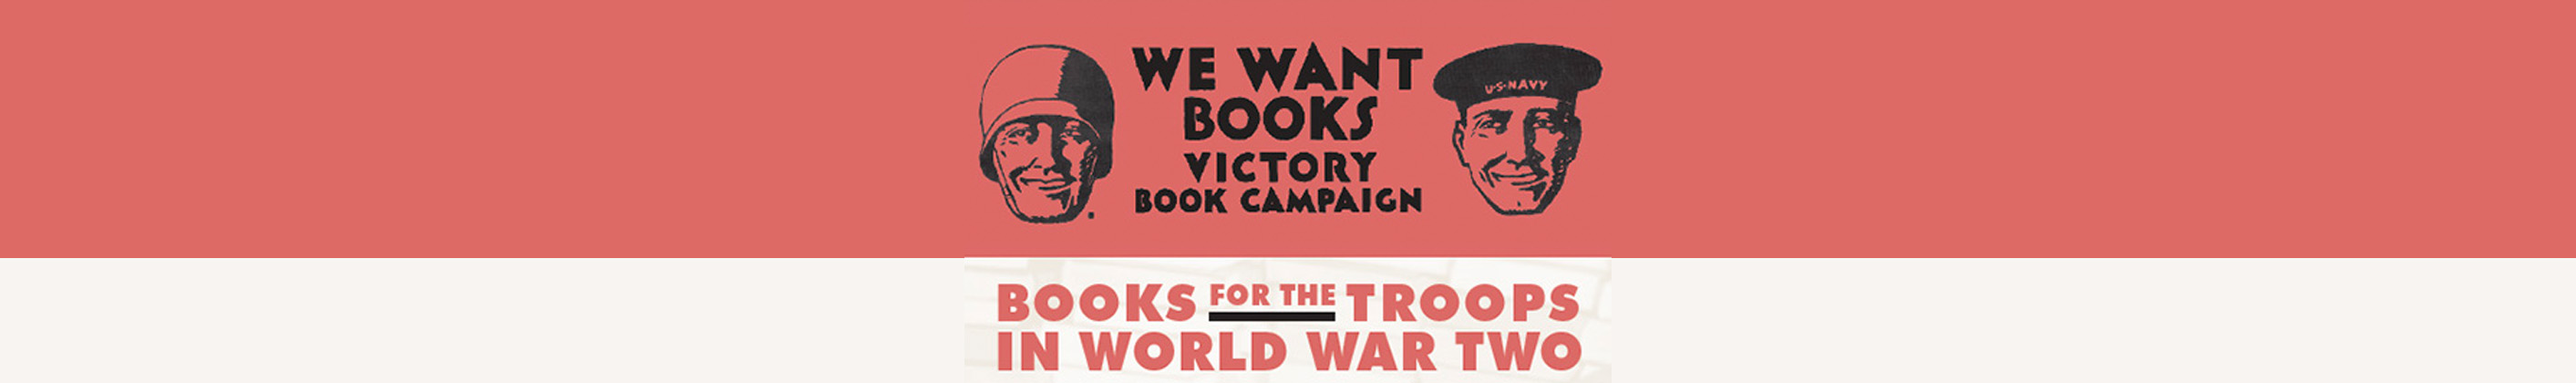 We Want Books for the Troops banner